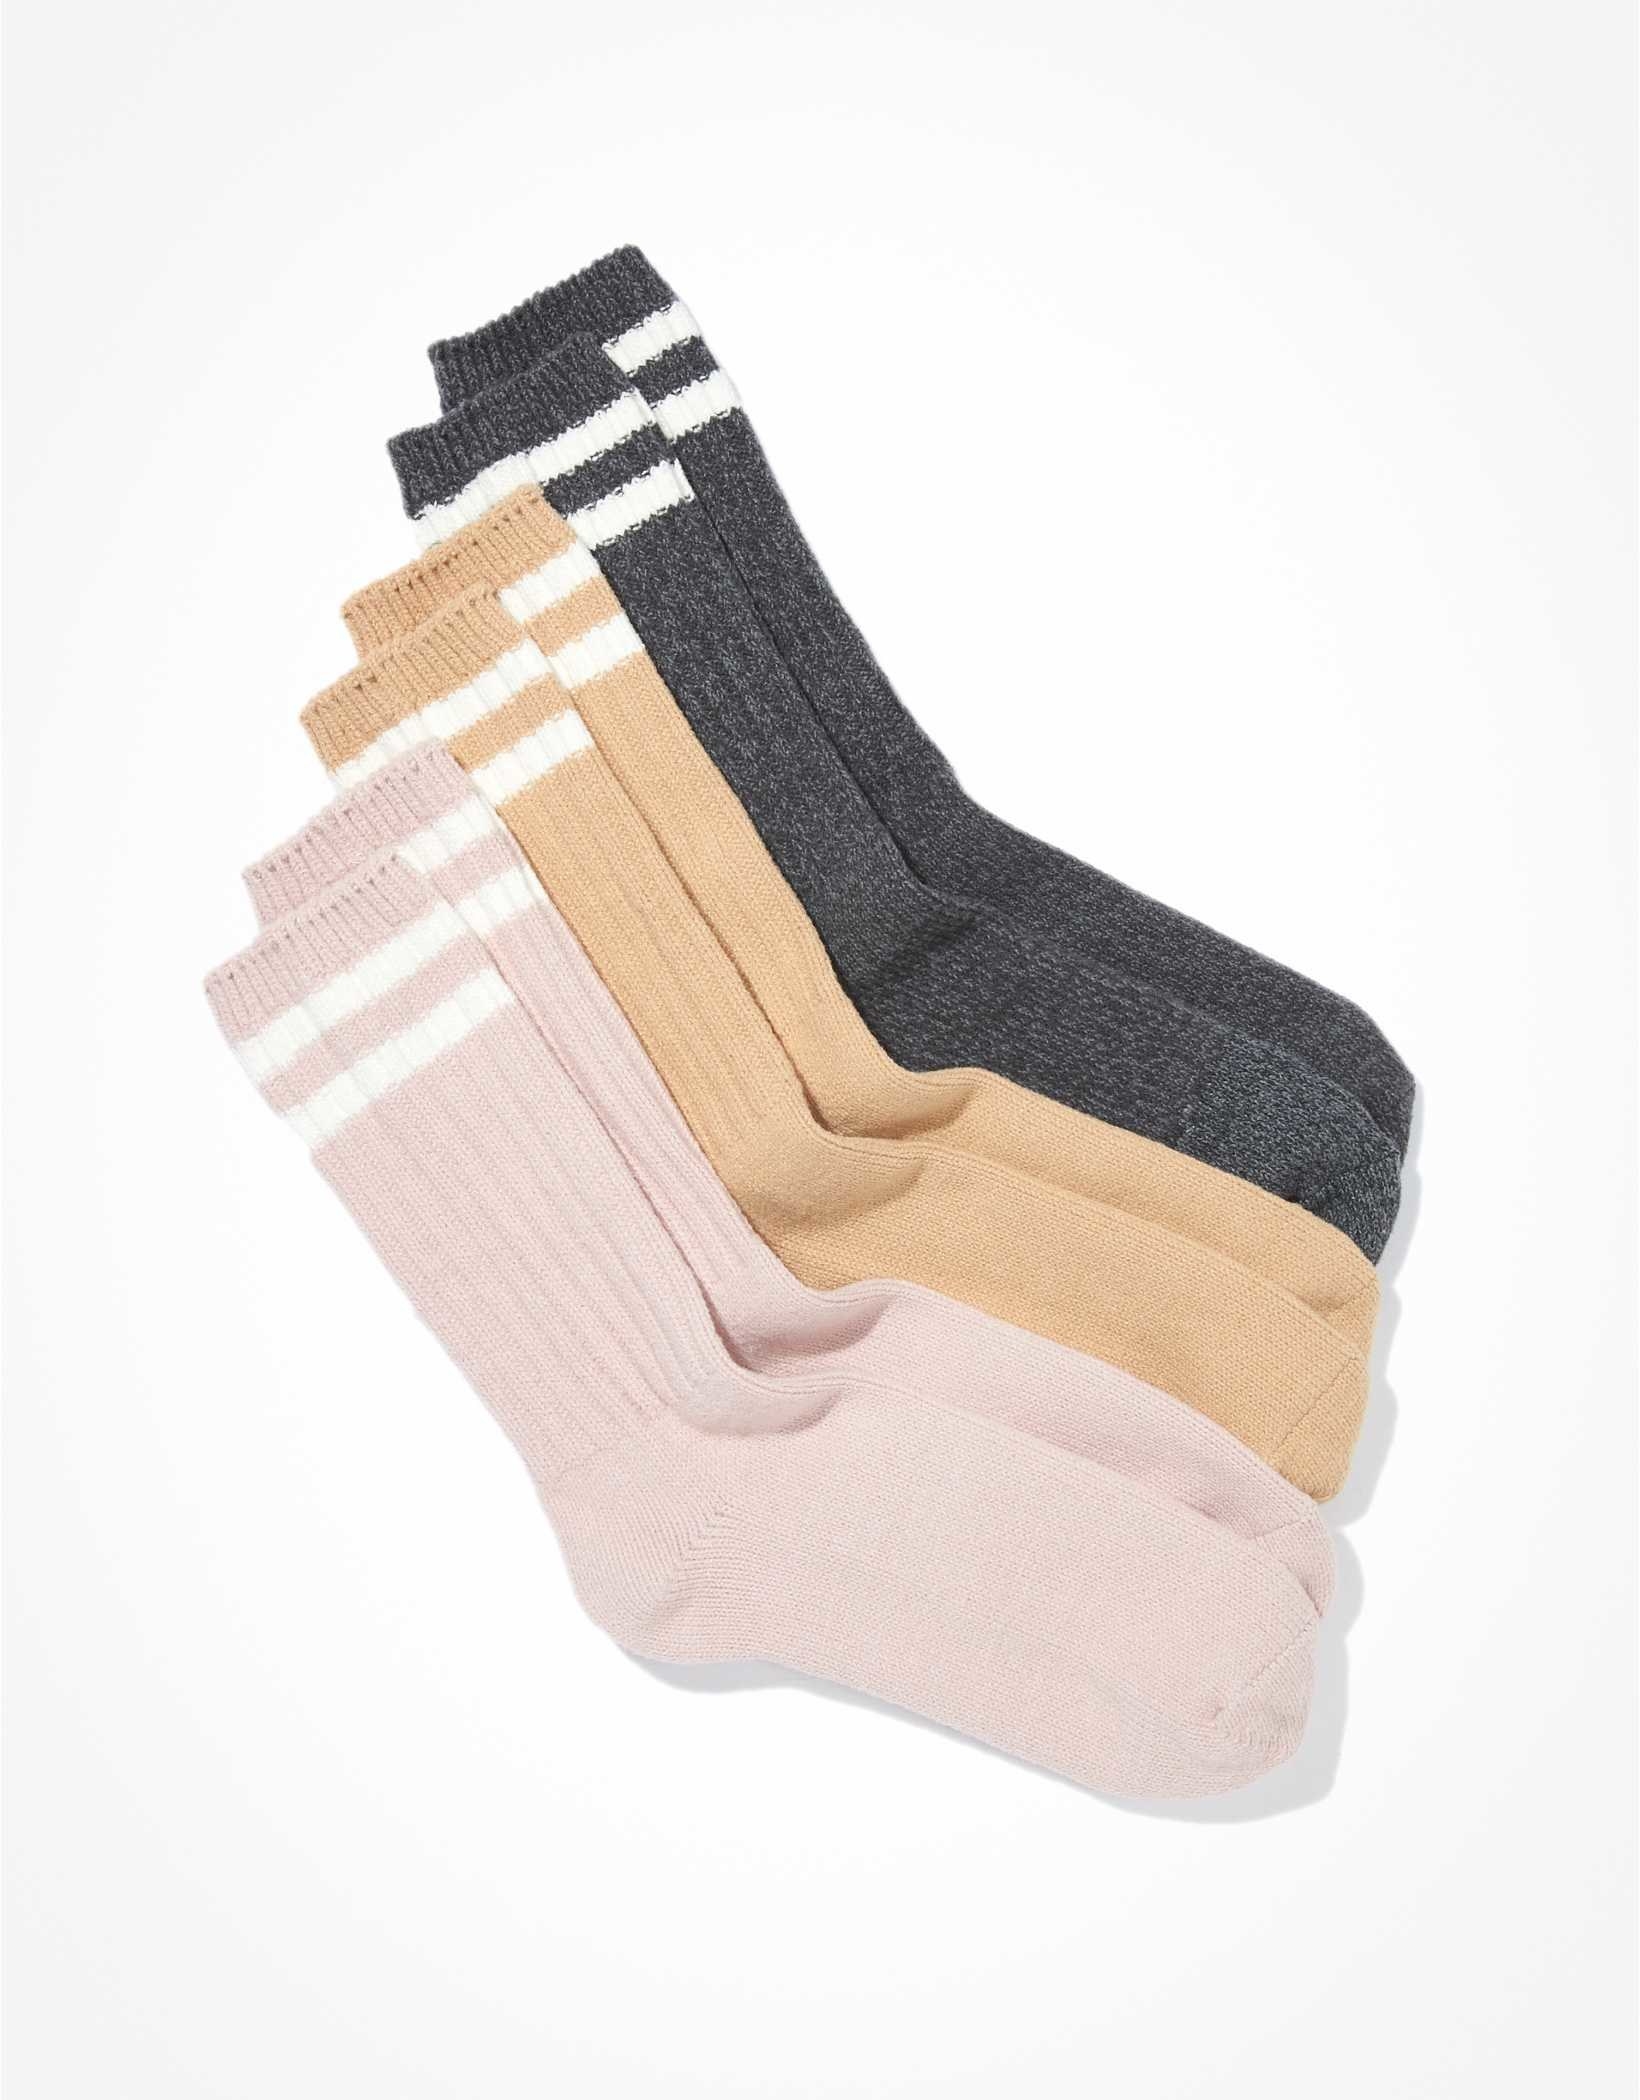 A three pack of dad socks in three colors